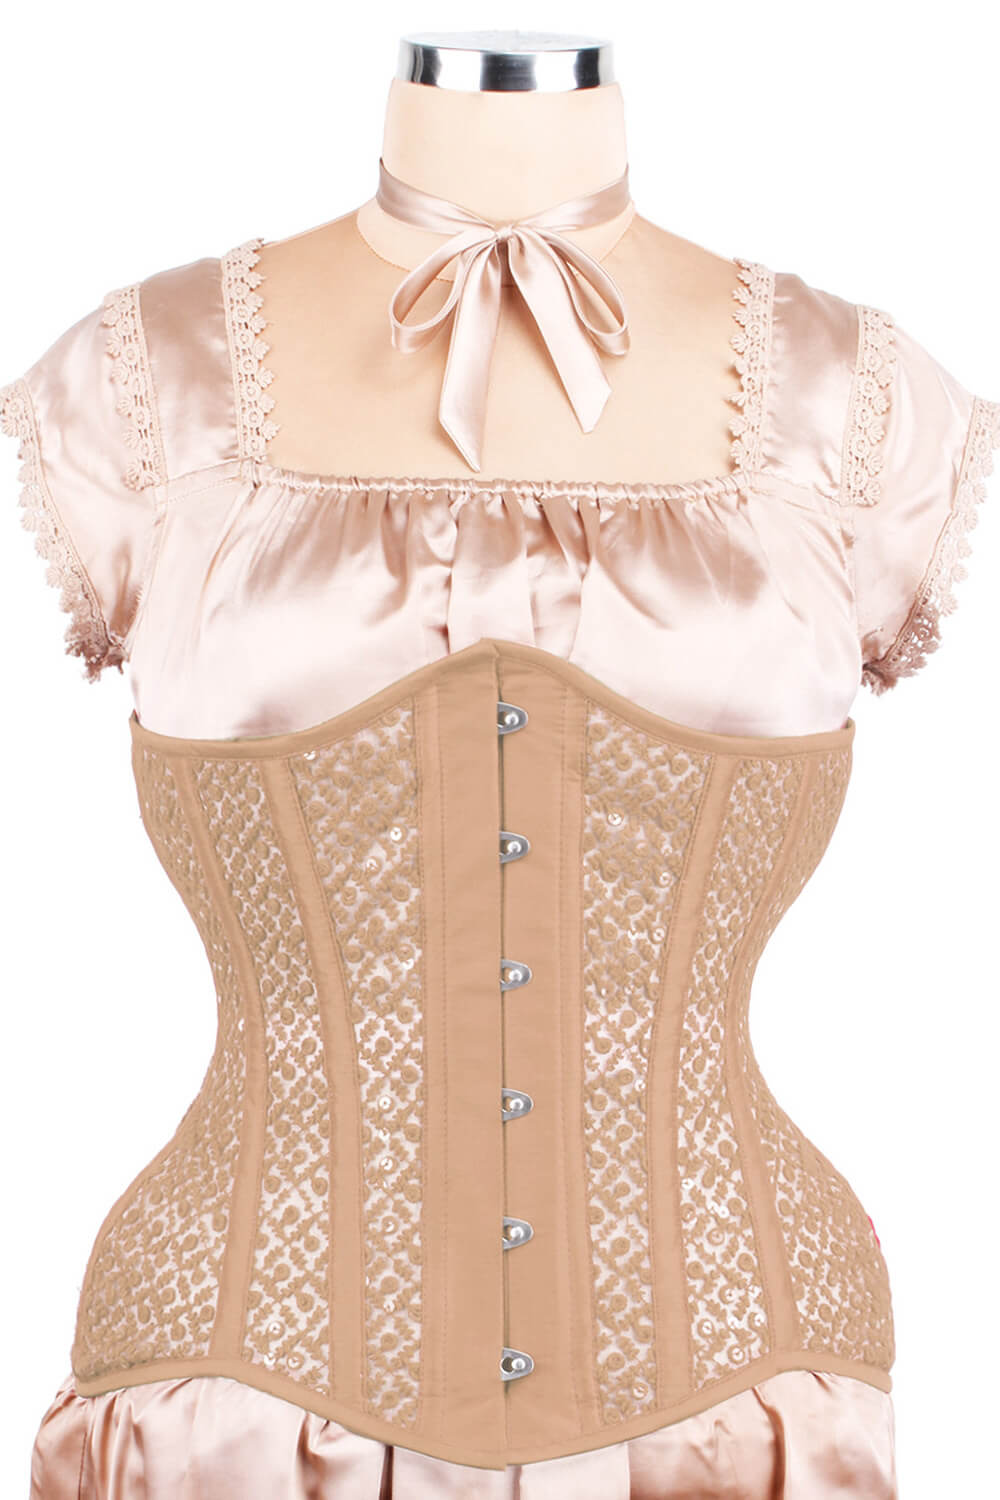 Handcrafted Bespoke Custom Made to Measure Gold Silk Dupioni Victorian  Underbust Corset With Matching Panty 